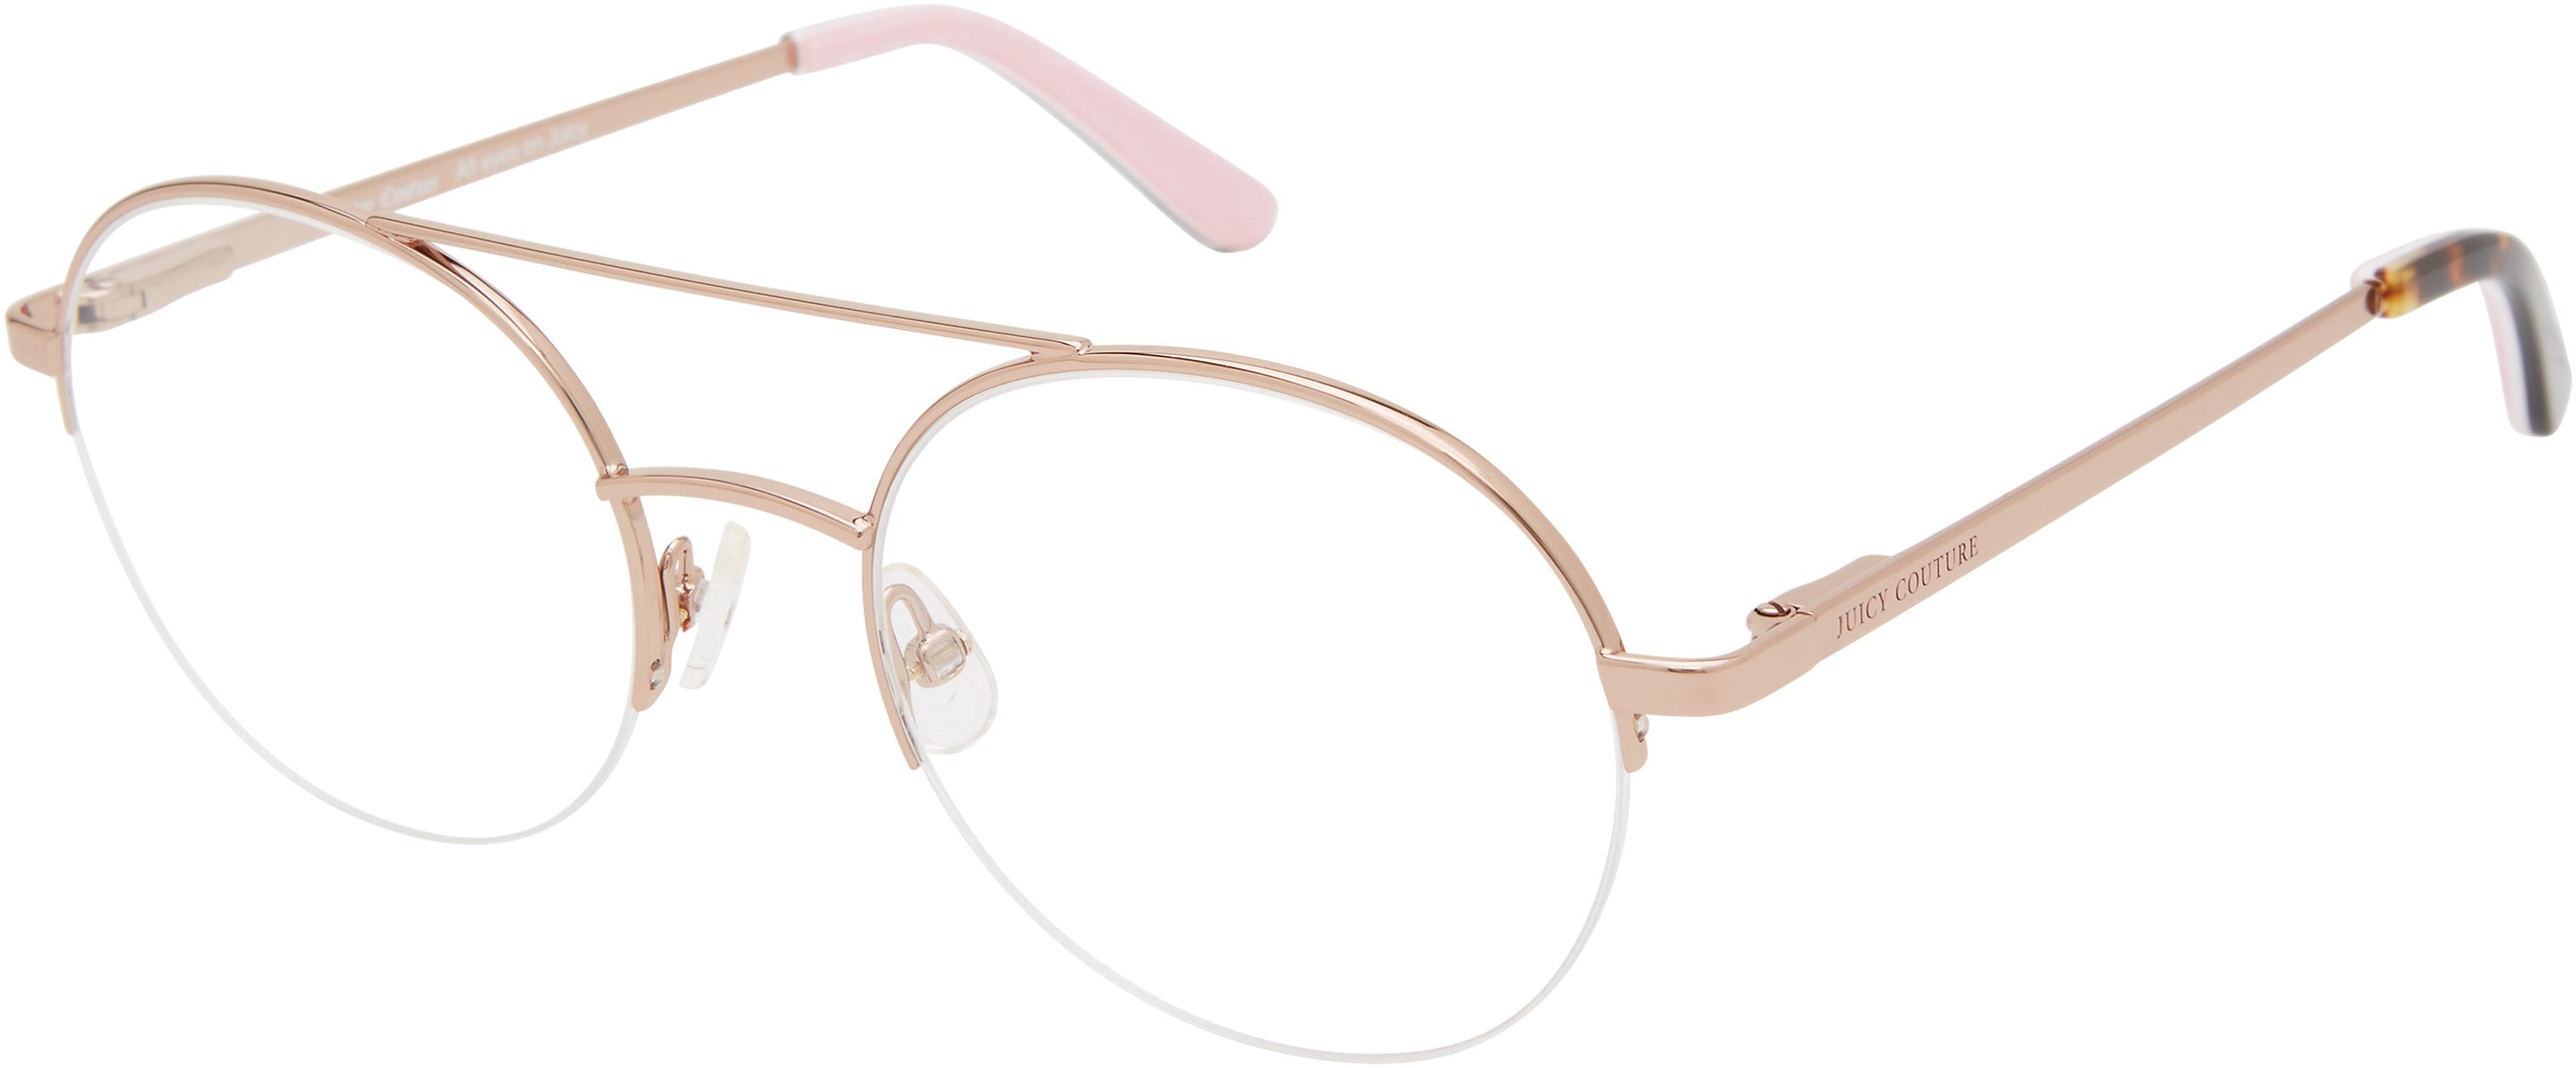 Juicy Couture Juicy 307/G Oval Modified Eyeglasses 0000-0000  Rose Gold (00 Demo Lens)